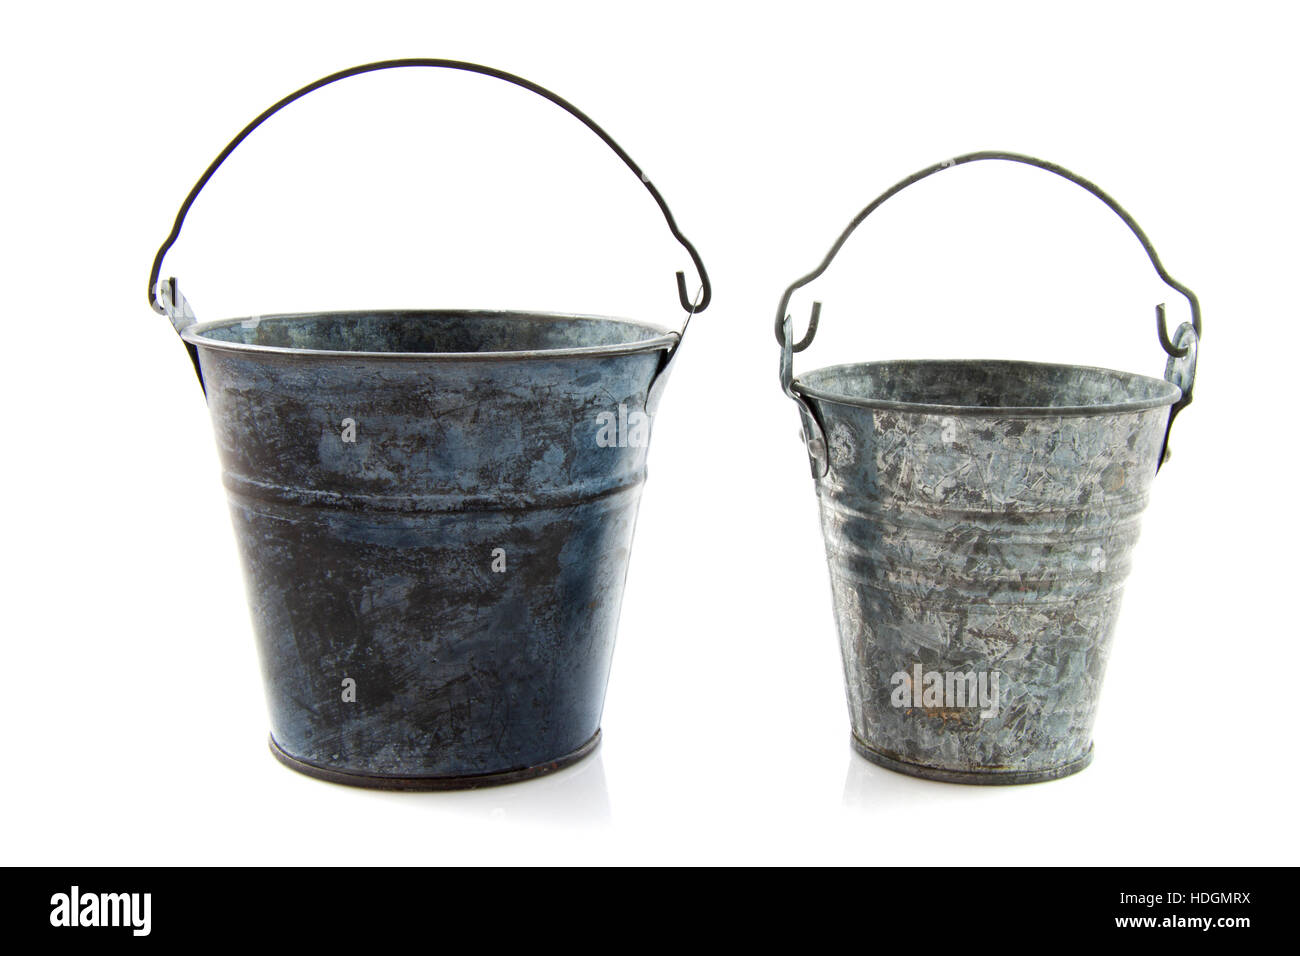 Vintage Stackable Aluminum Buckets and Pans 